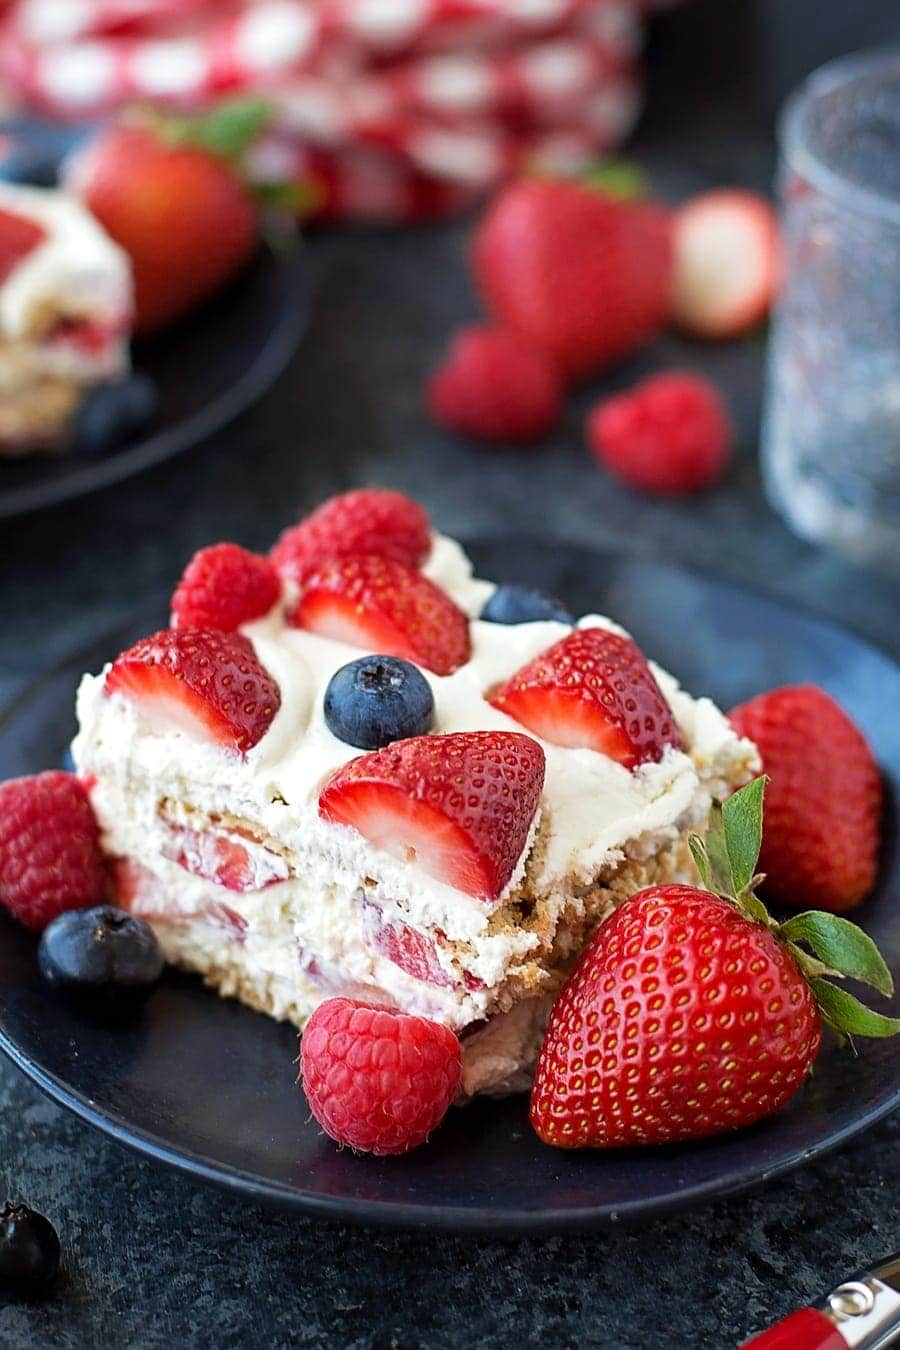 Holiday cakes - Easy No-Bake Berry Icebox Cake topped with fresh berries.